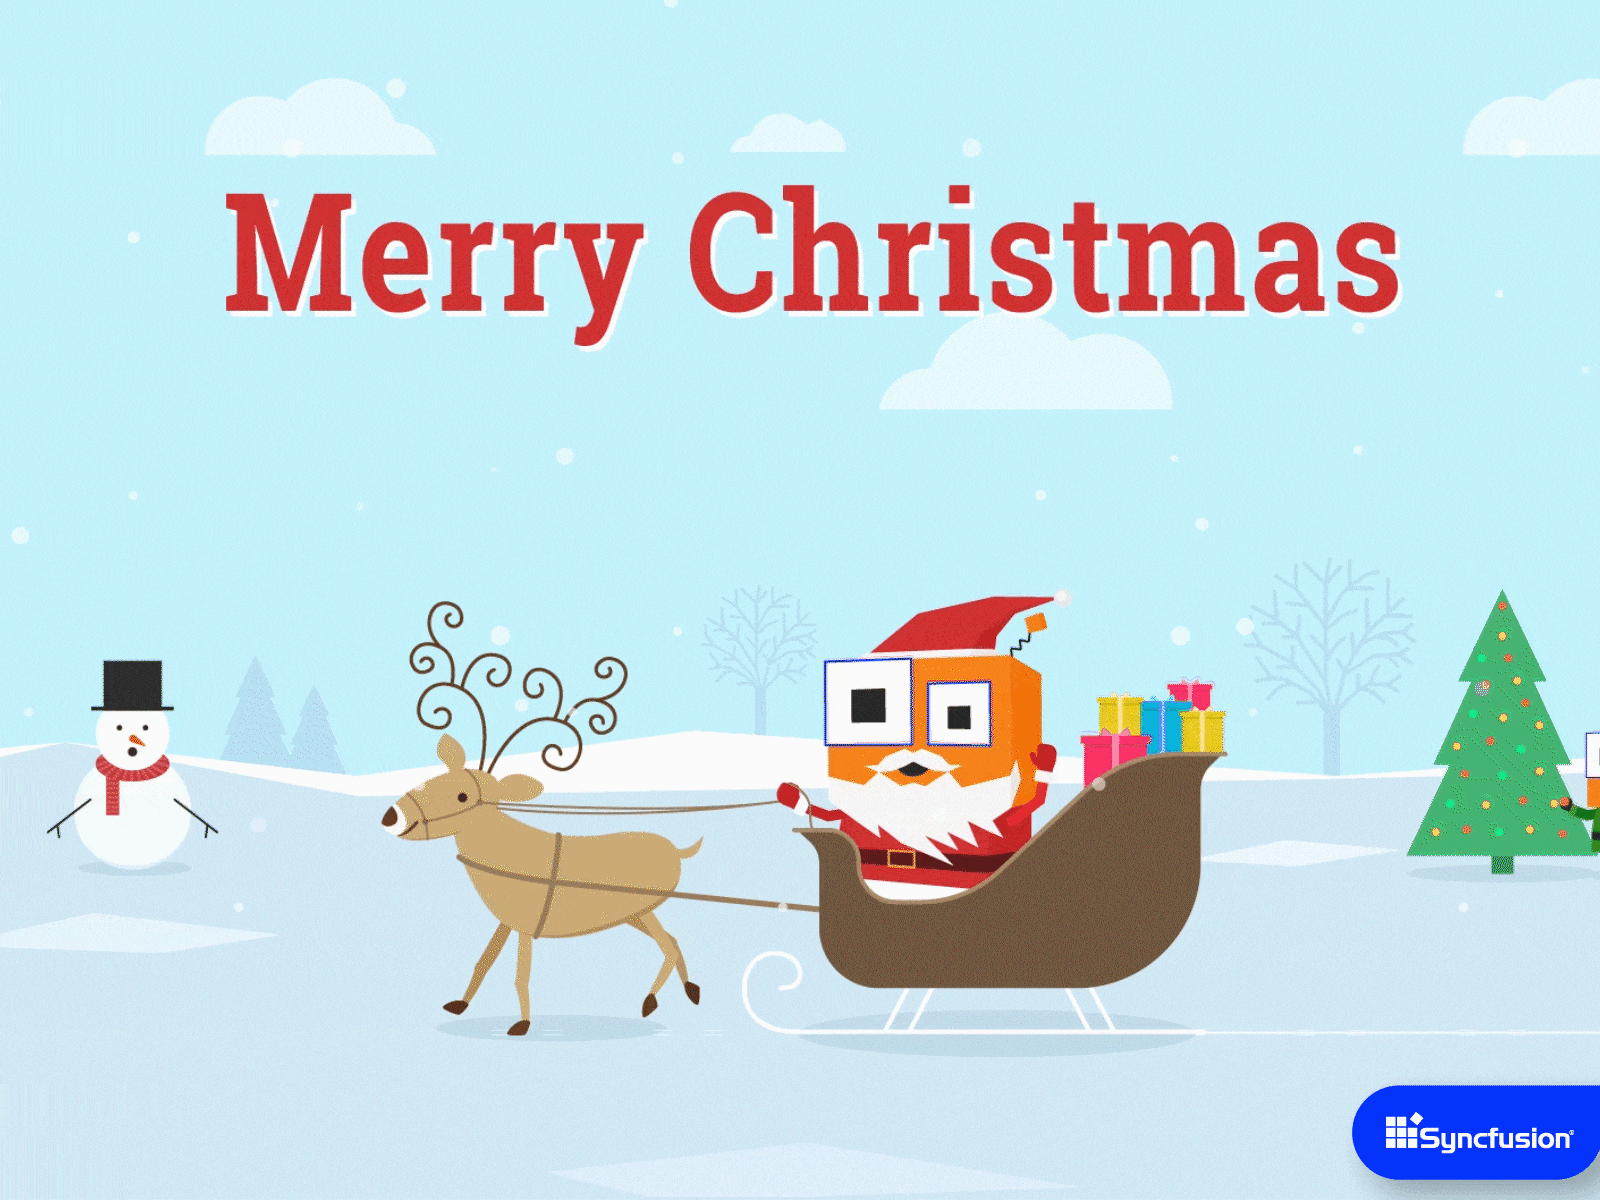 Merry Christmas P1 2d animation 2d character 2d character animation 2d illustration 2danimation animation character character animation latest animation latest trend